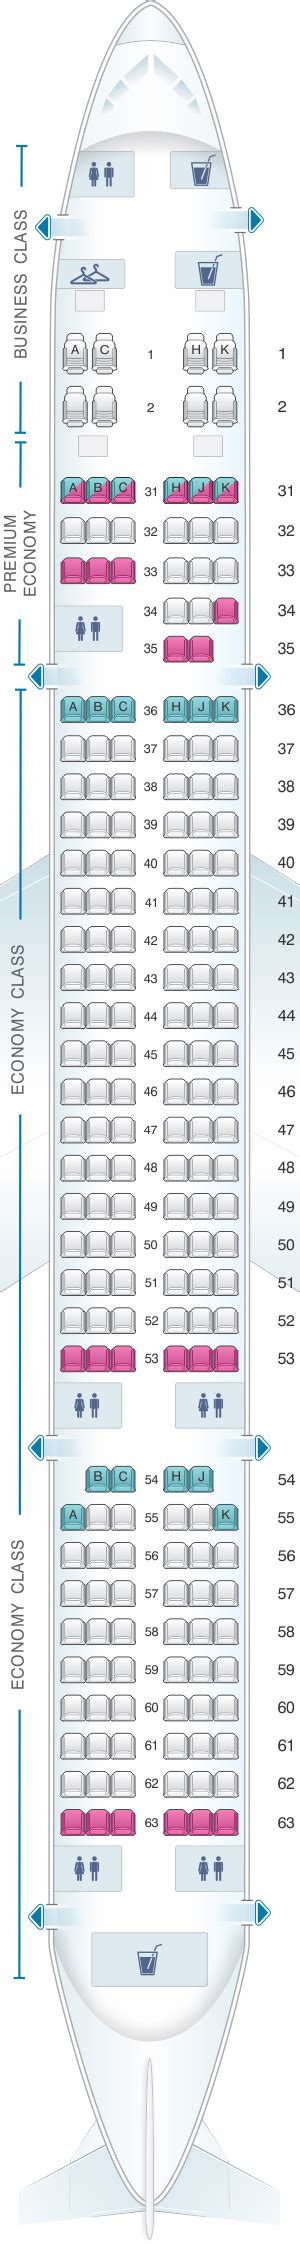 China Southern Airlines Seat Chart Cabinets Matttroy